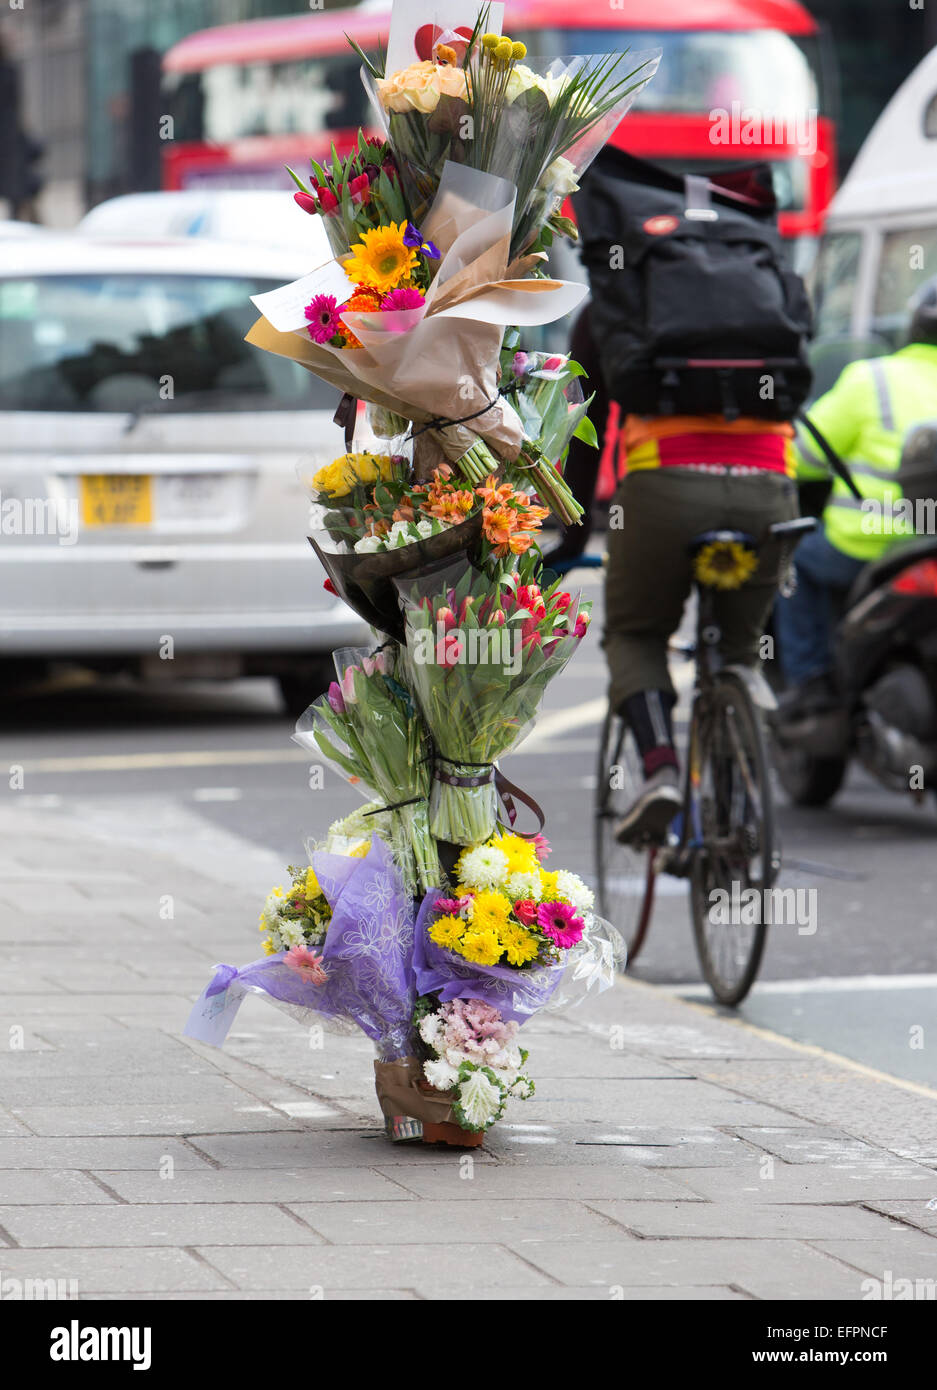 Floral tributes left at the scene of a fatal cyclist accident in central London Stock Photo